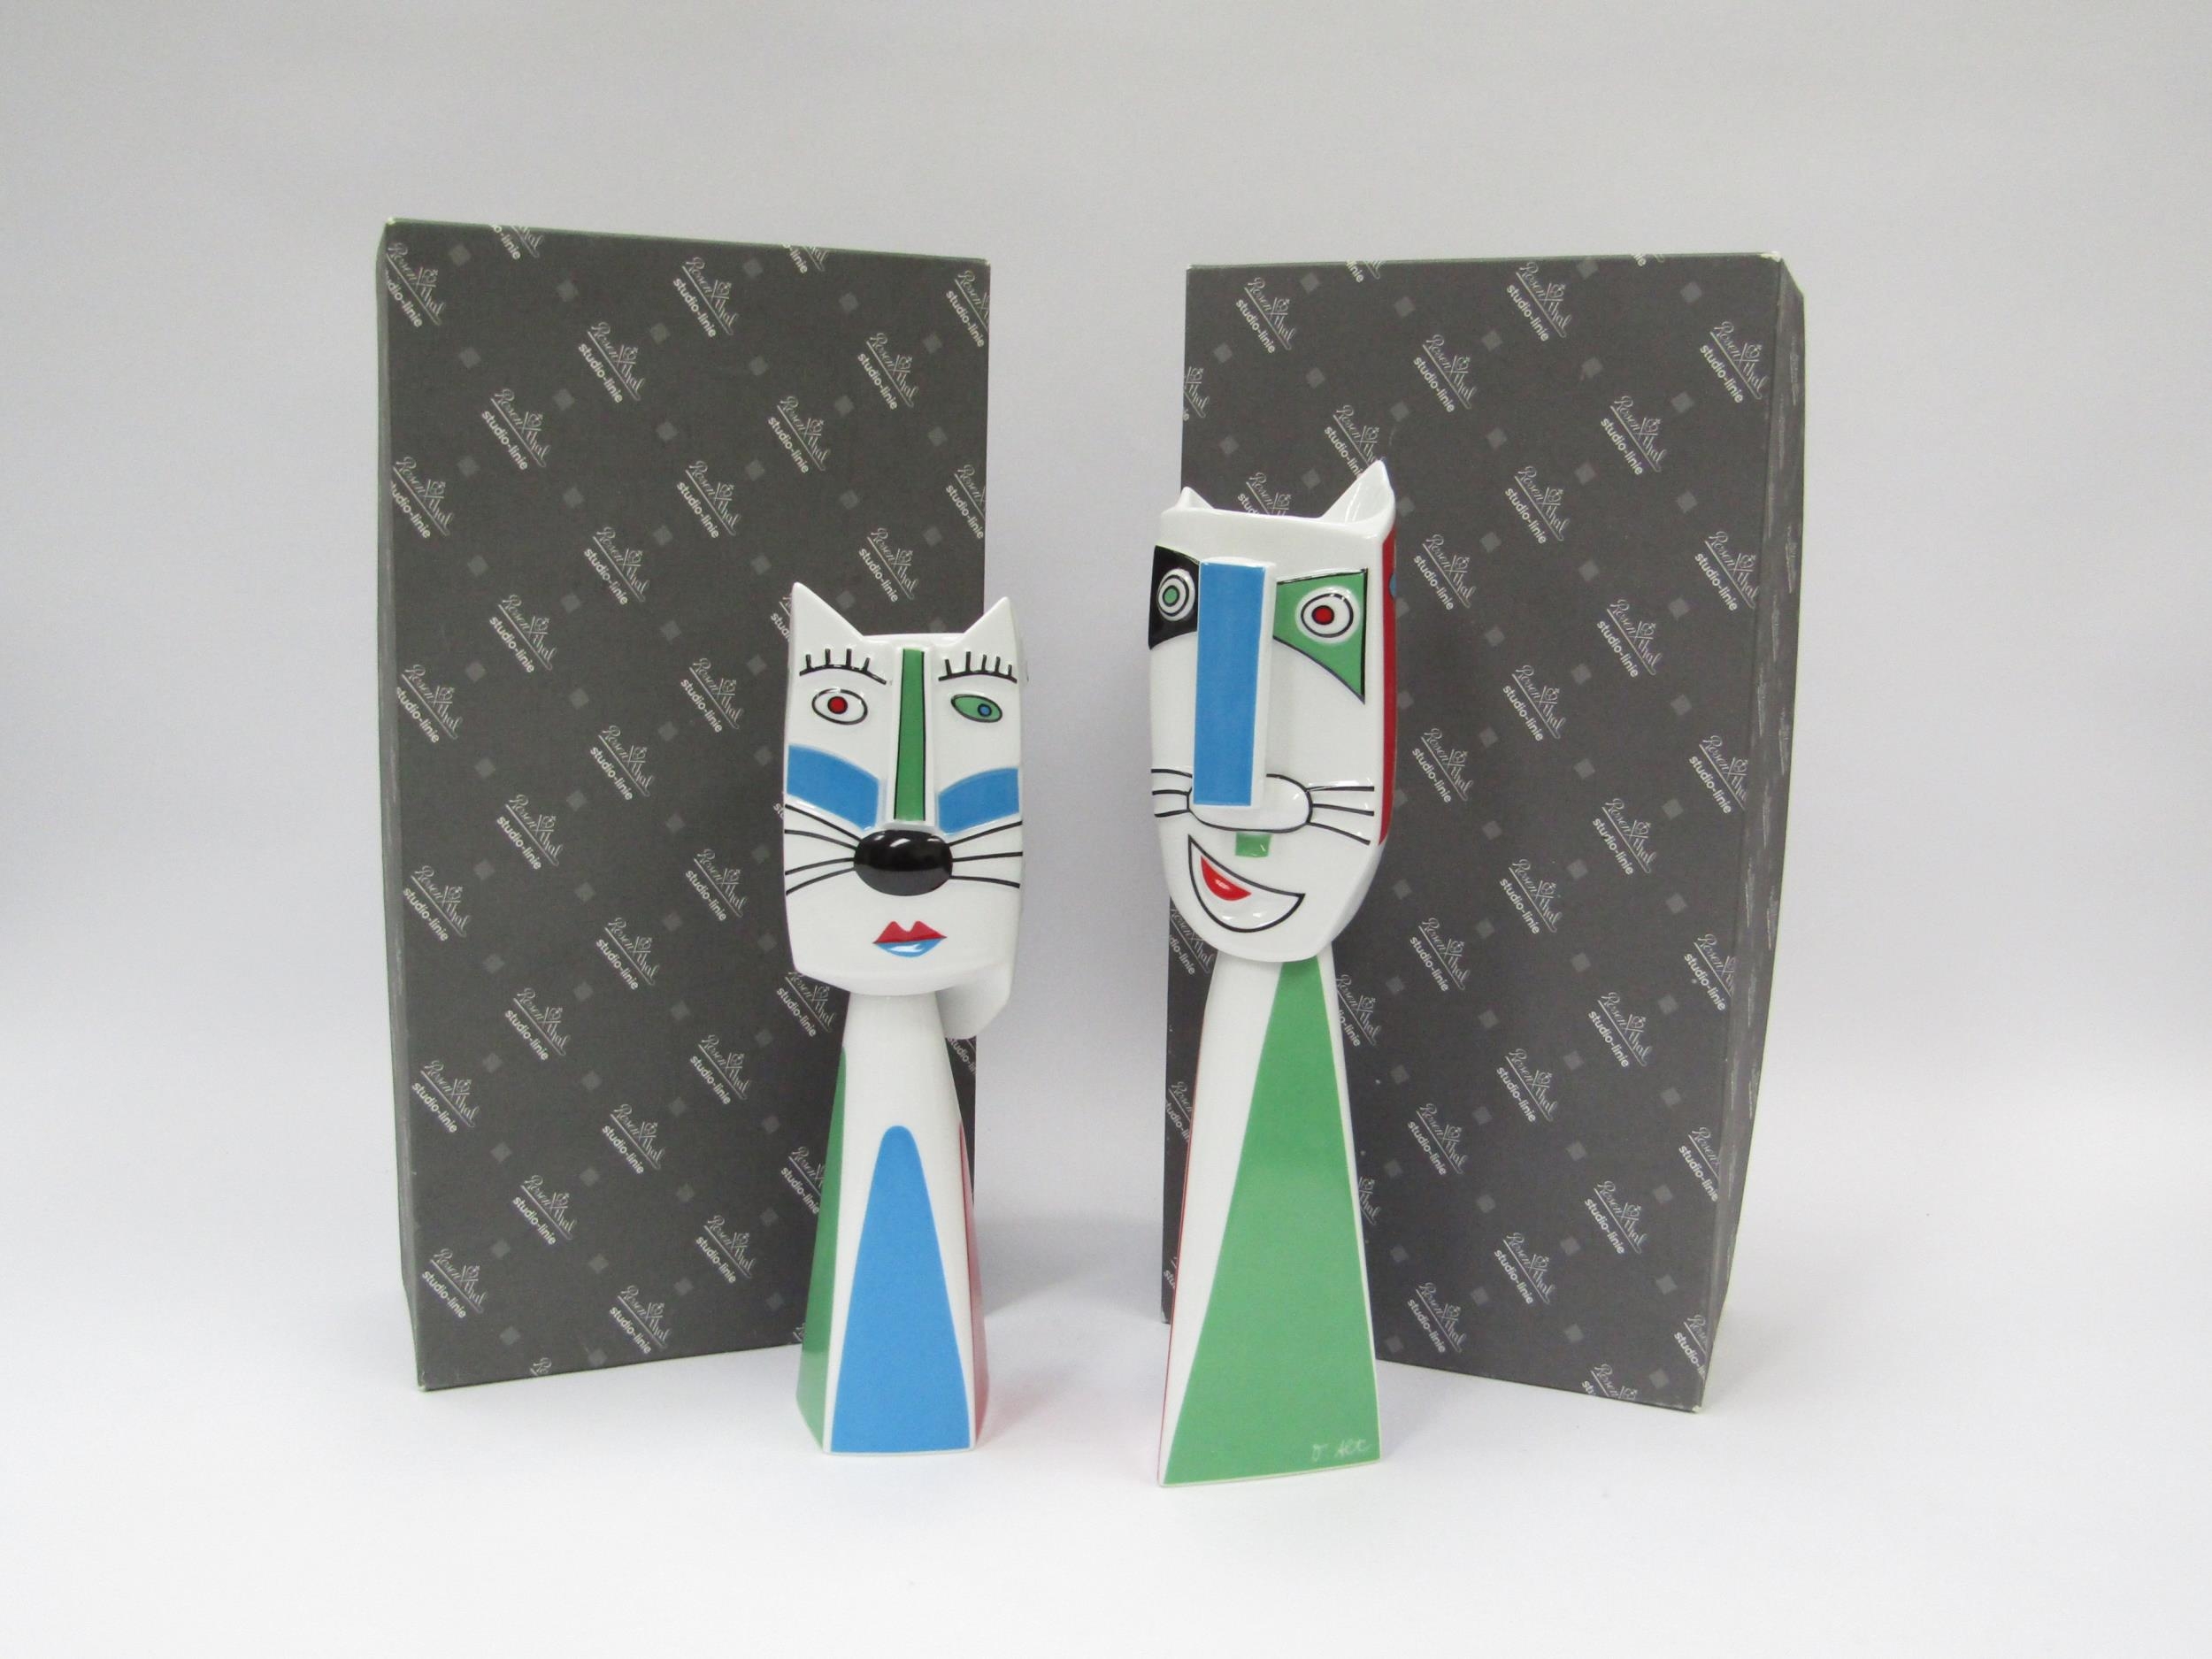 A pair of Rosenthal porcelain candleholders by Otmar Alt with cat / human faces. Signature in print.